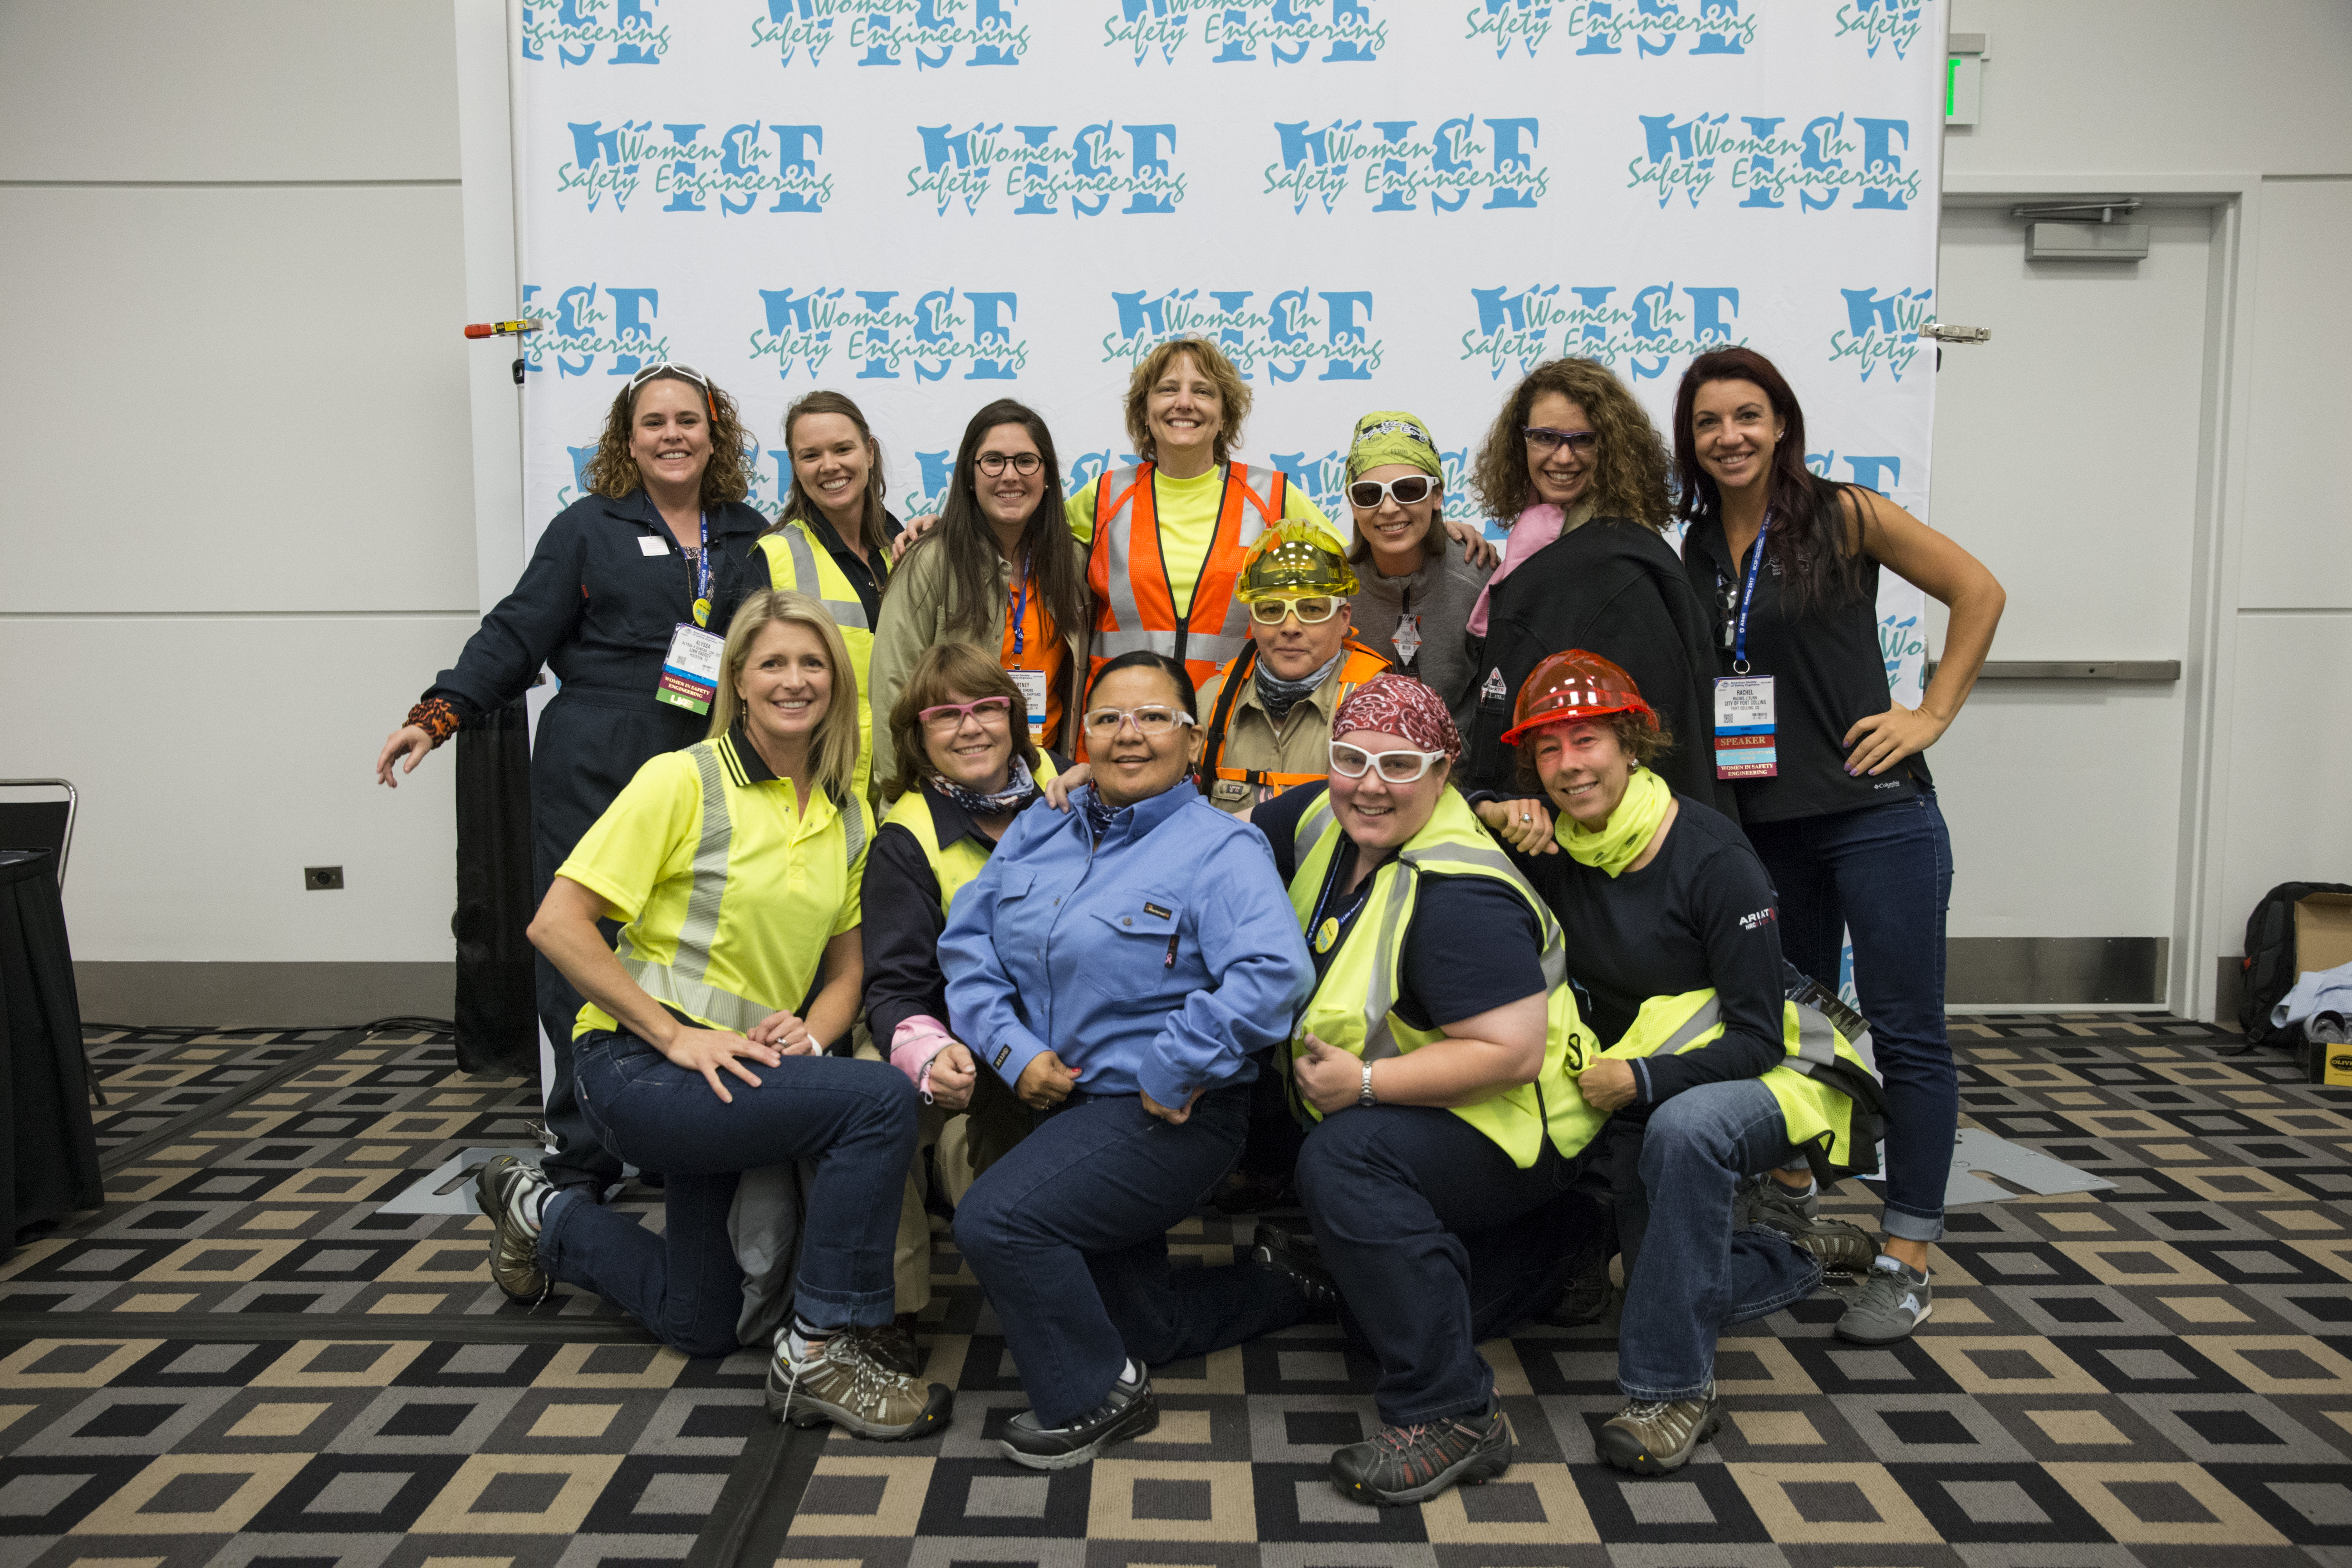 The Women in Safety Excellence (WISE) Common Interest Group